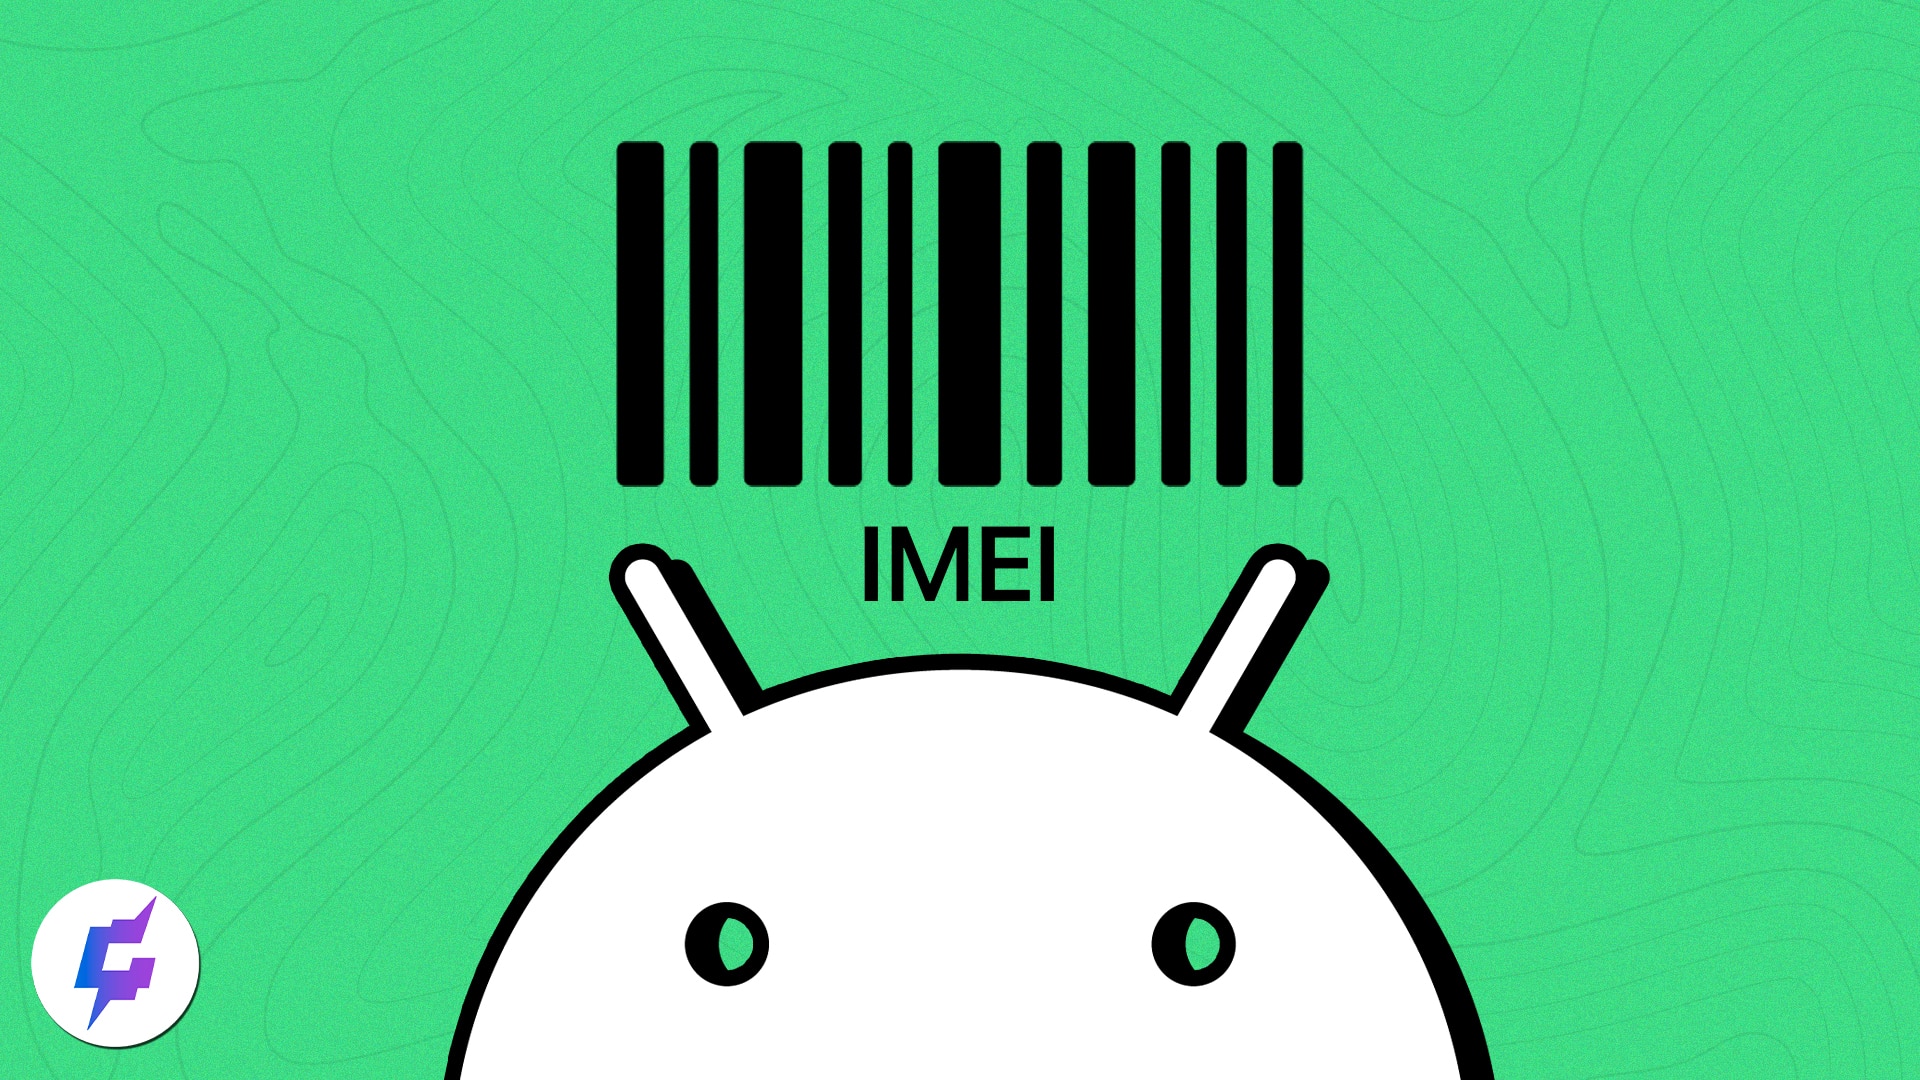 How to find IMEI number on Android phone